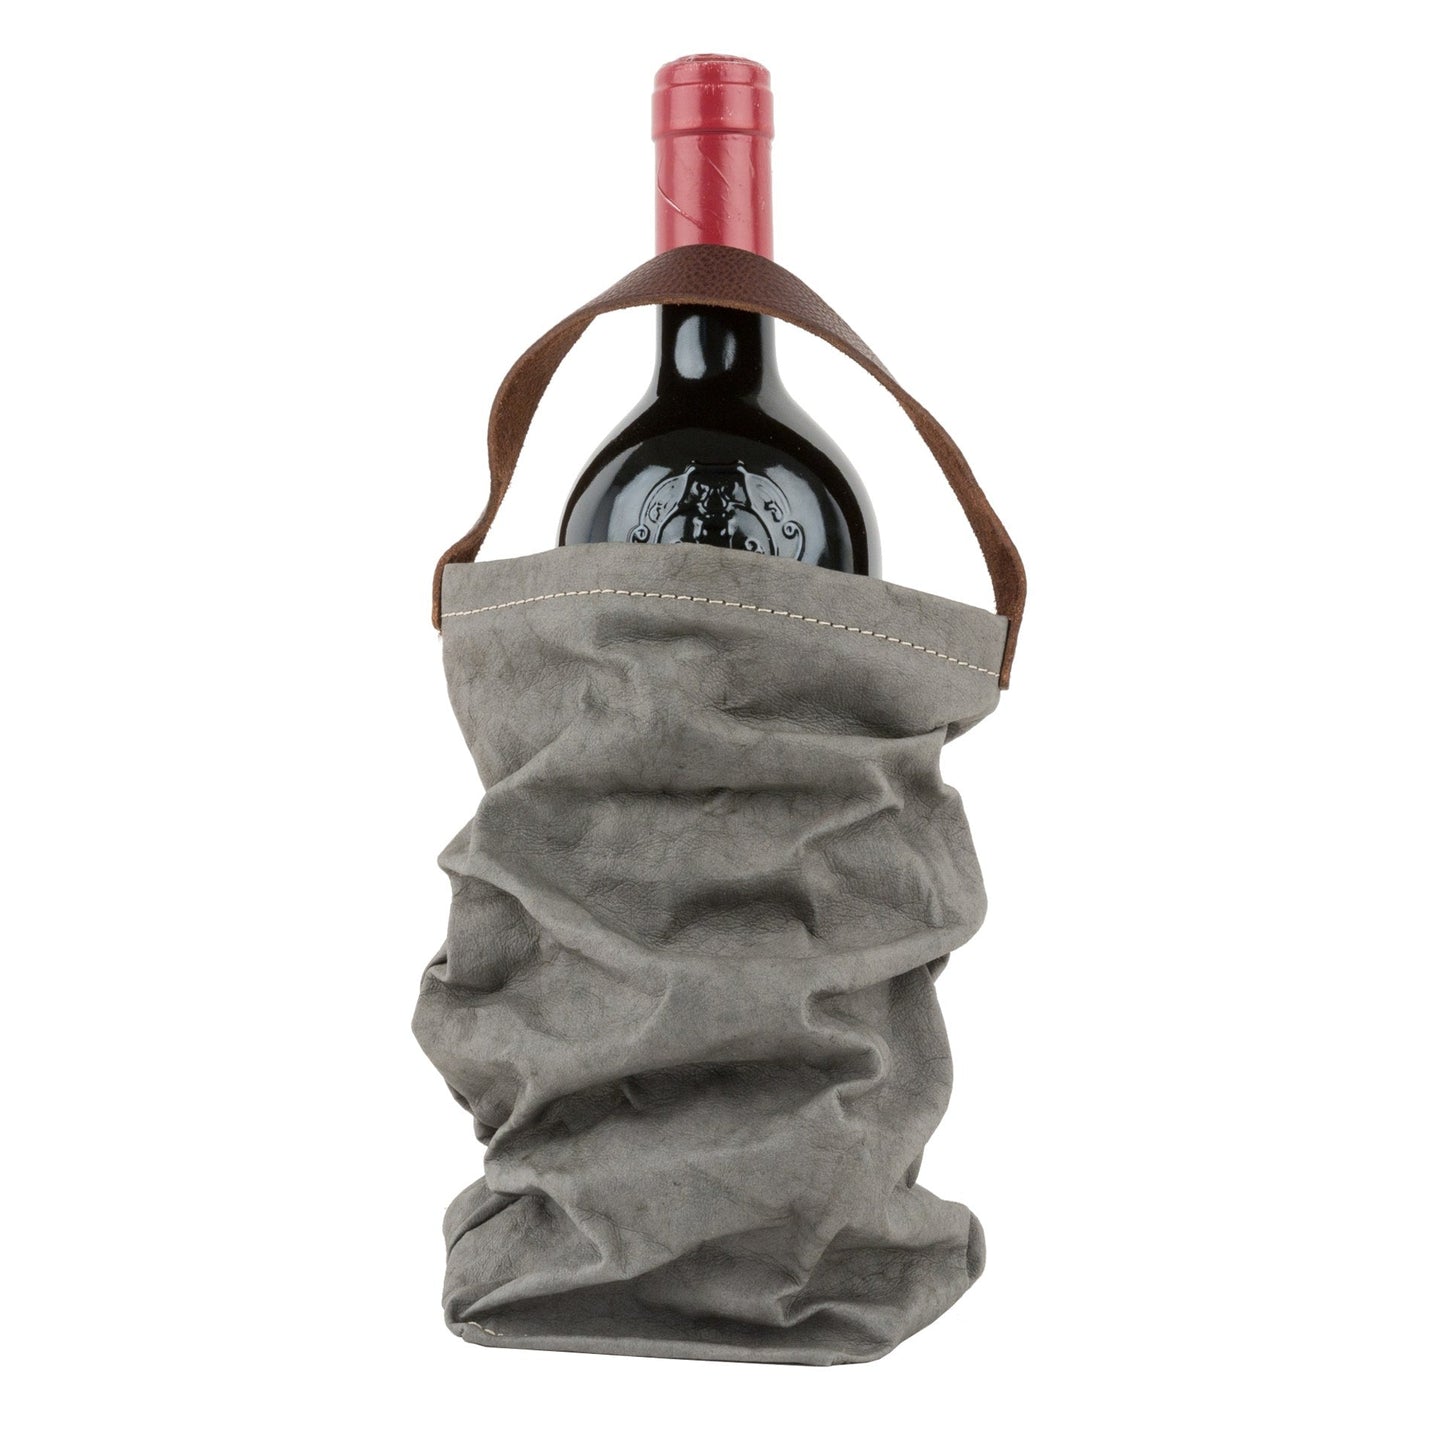 A red wine bottle is shown inside a washable paper wine bag. The bag has a small brown leather handle at the top for carrying. The washable paper wine bag shown is dark grey.